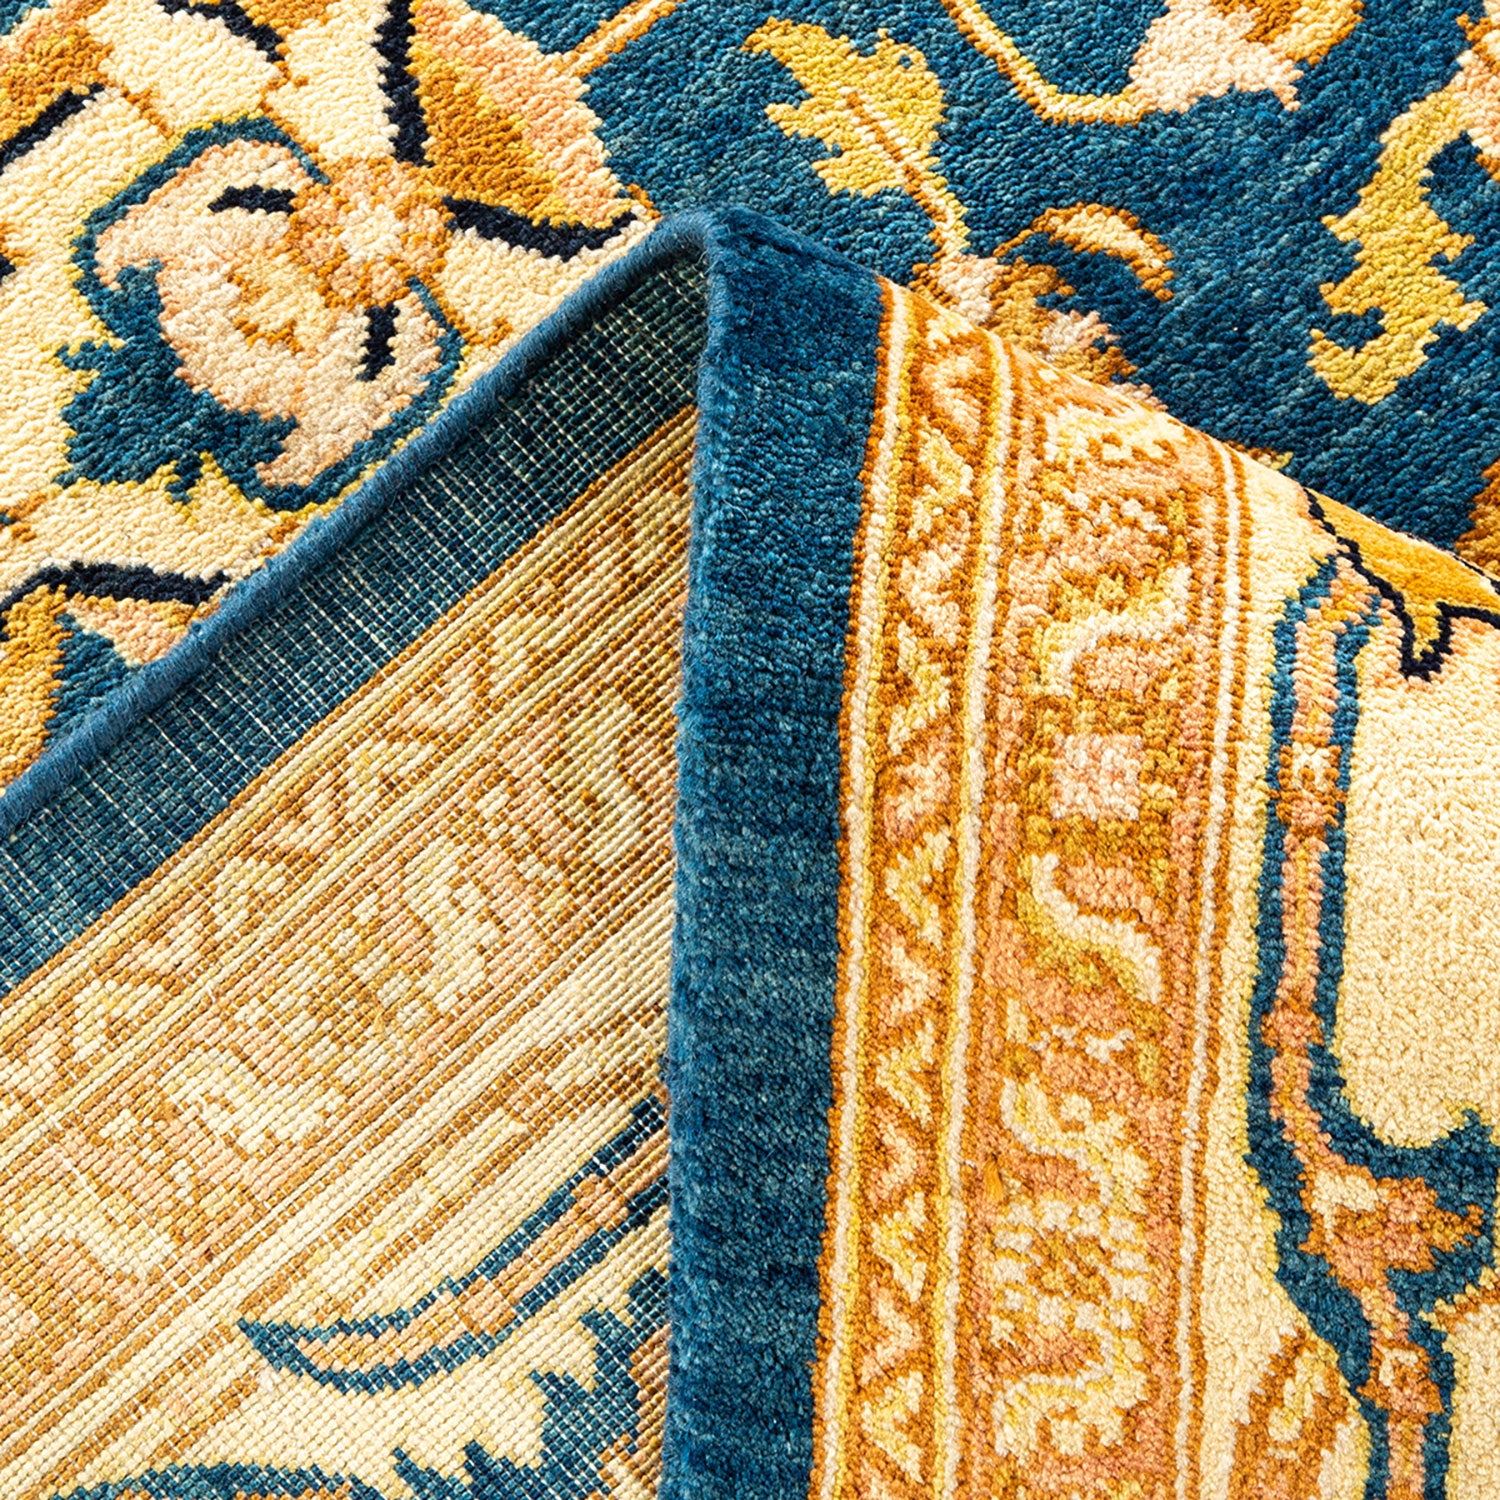 Close-up of a high-quality rug with contrasting blue and cream designs.